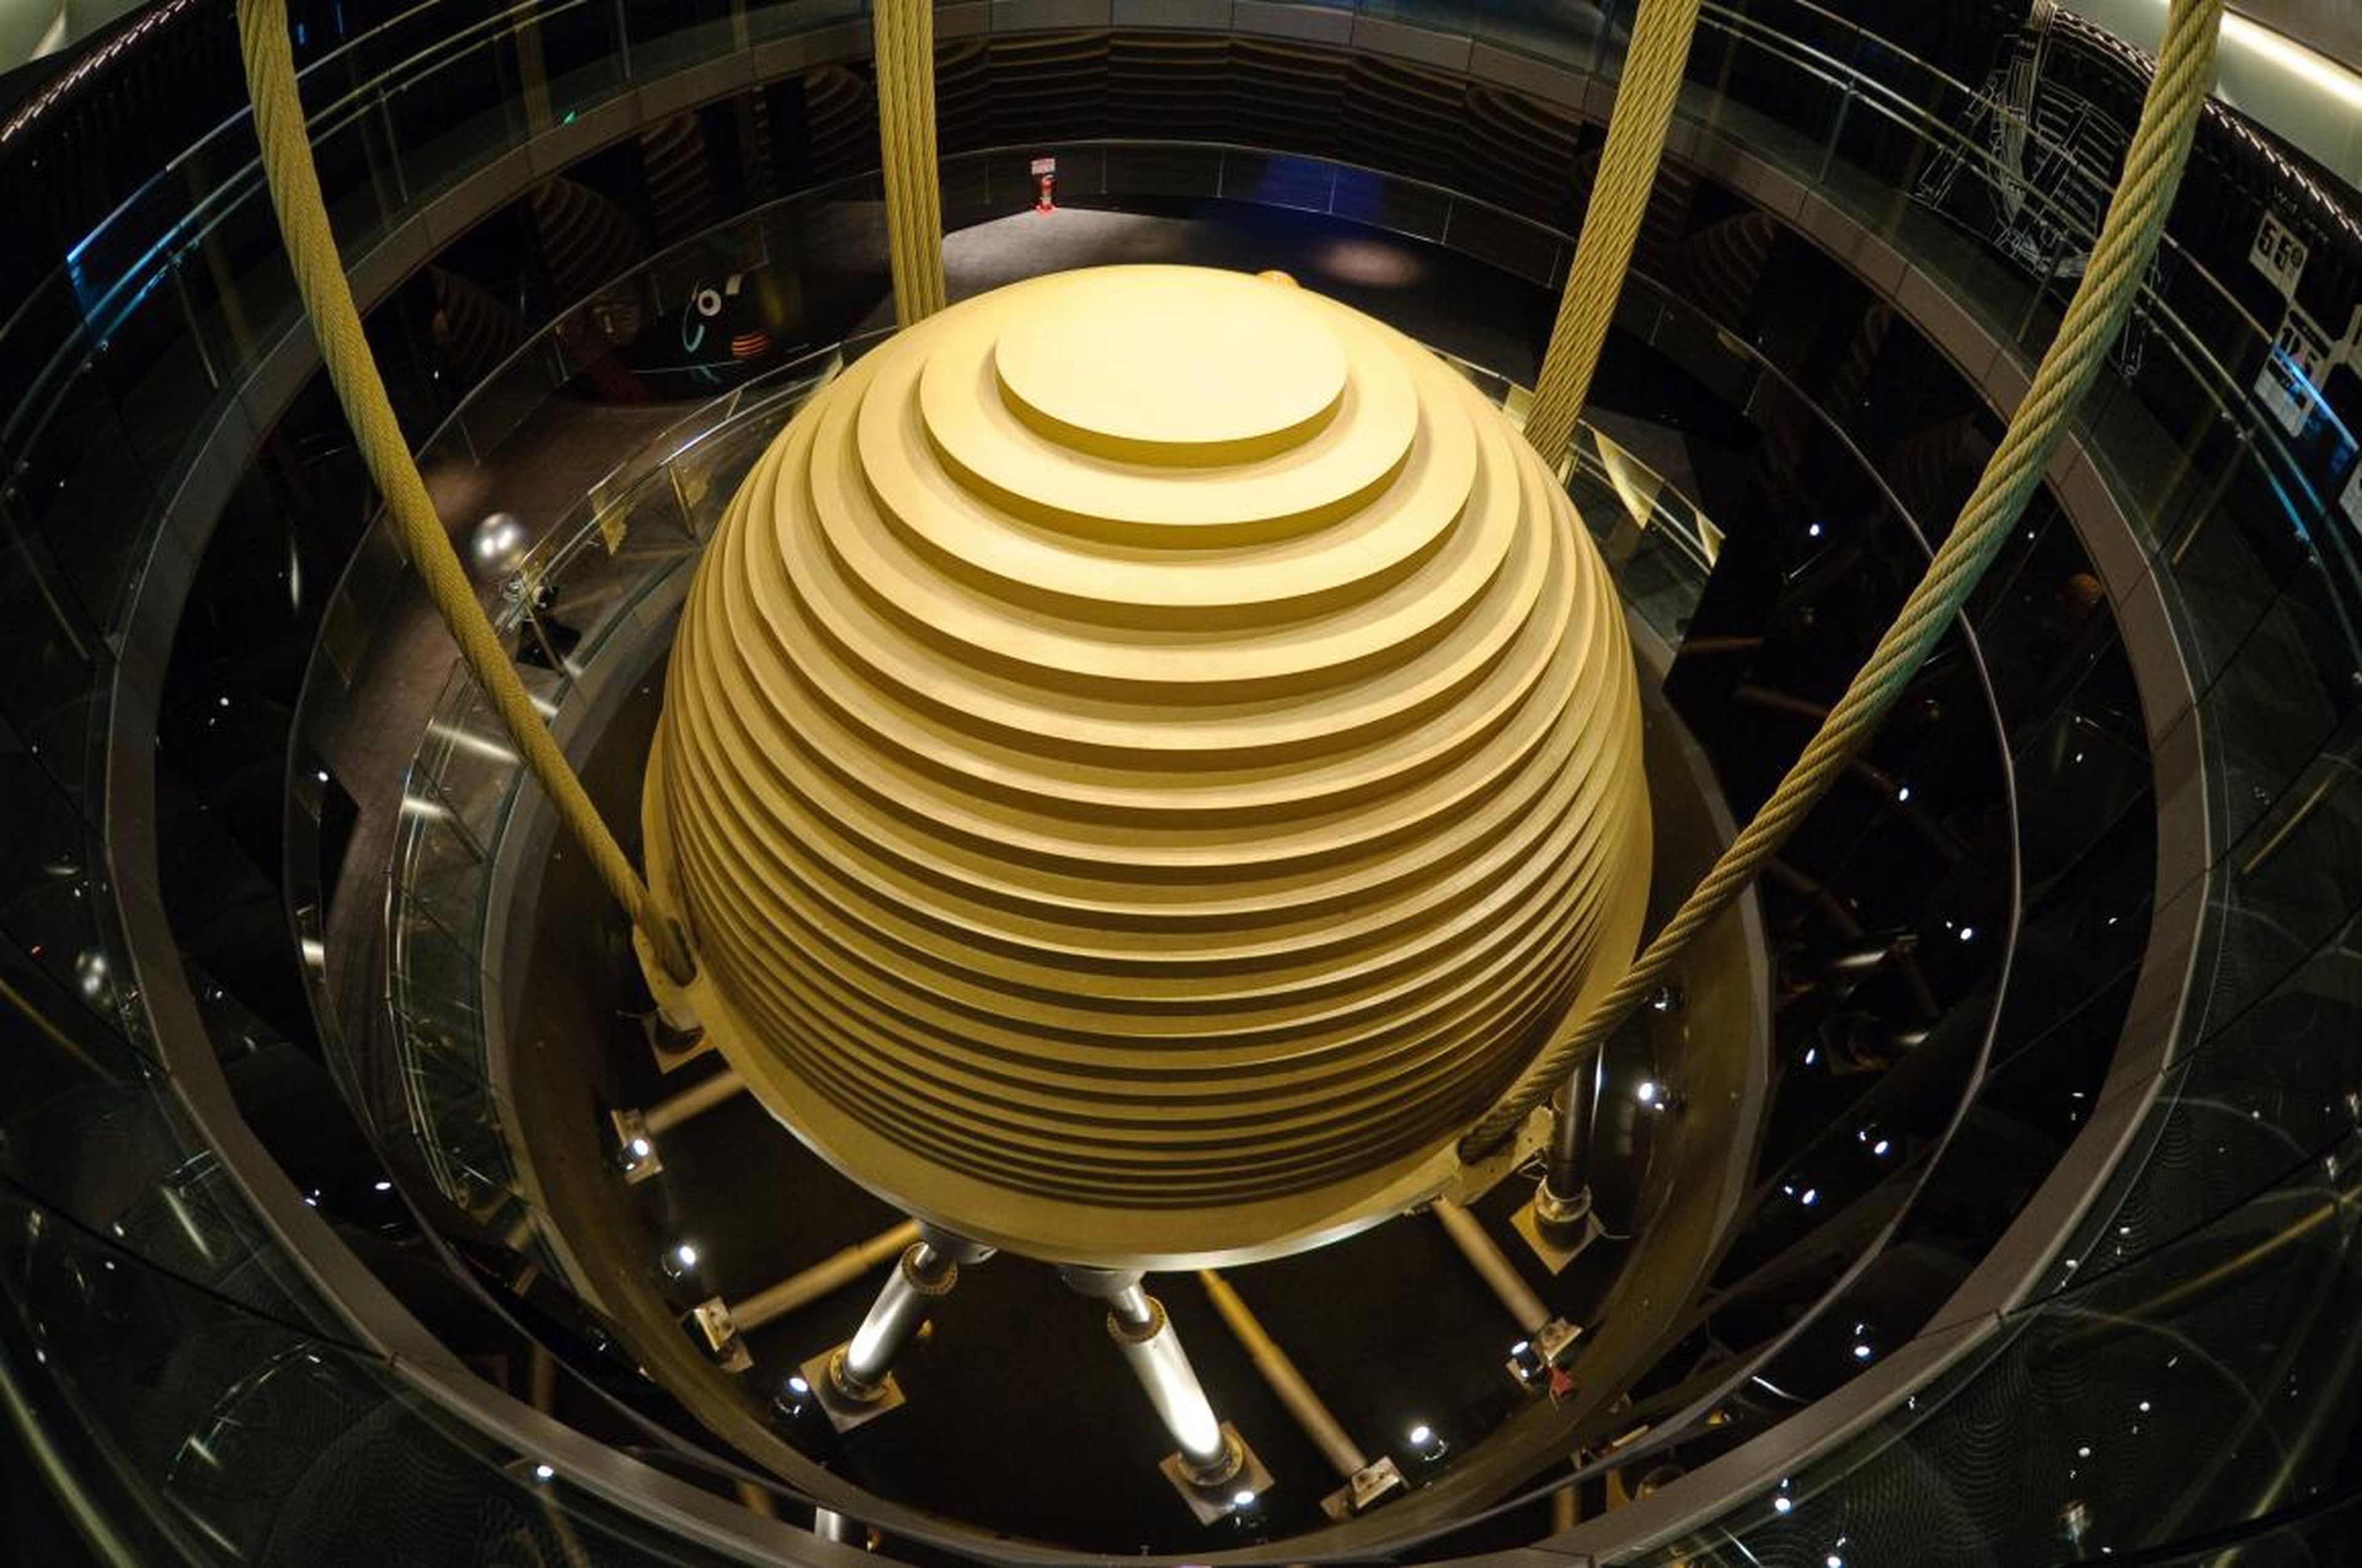 The skyscraper features a giant sphere painted gold, which spans its 87th through 92nd floors. The other levels contain offices, shops, and a restaurant.